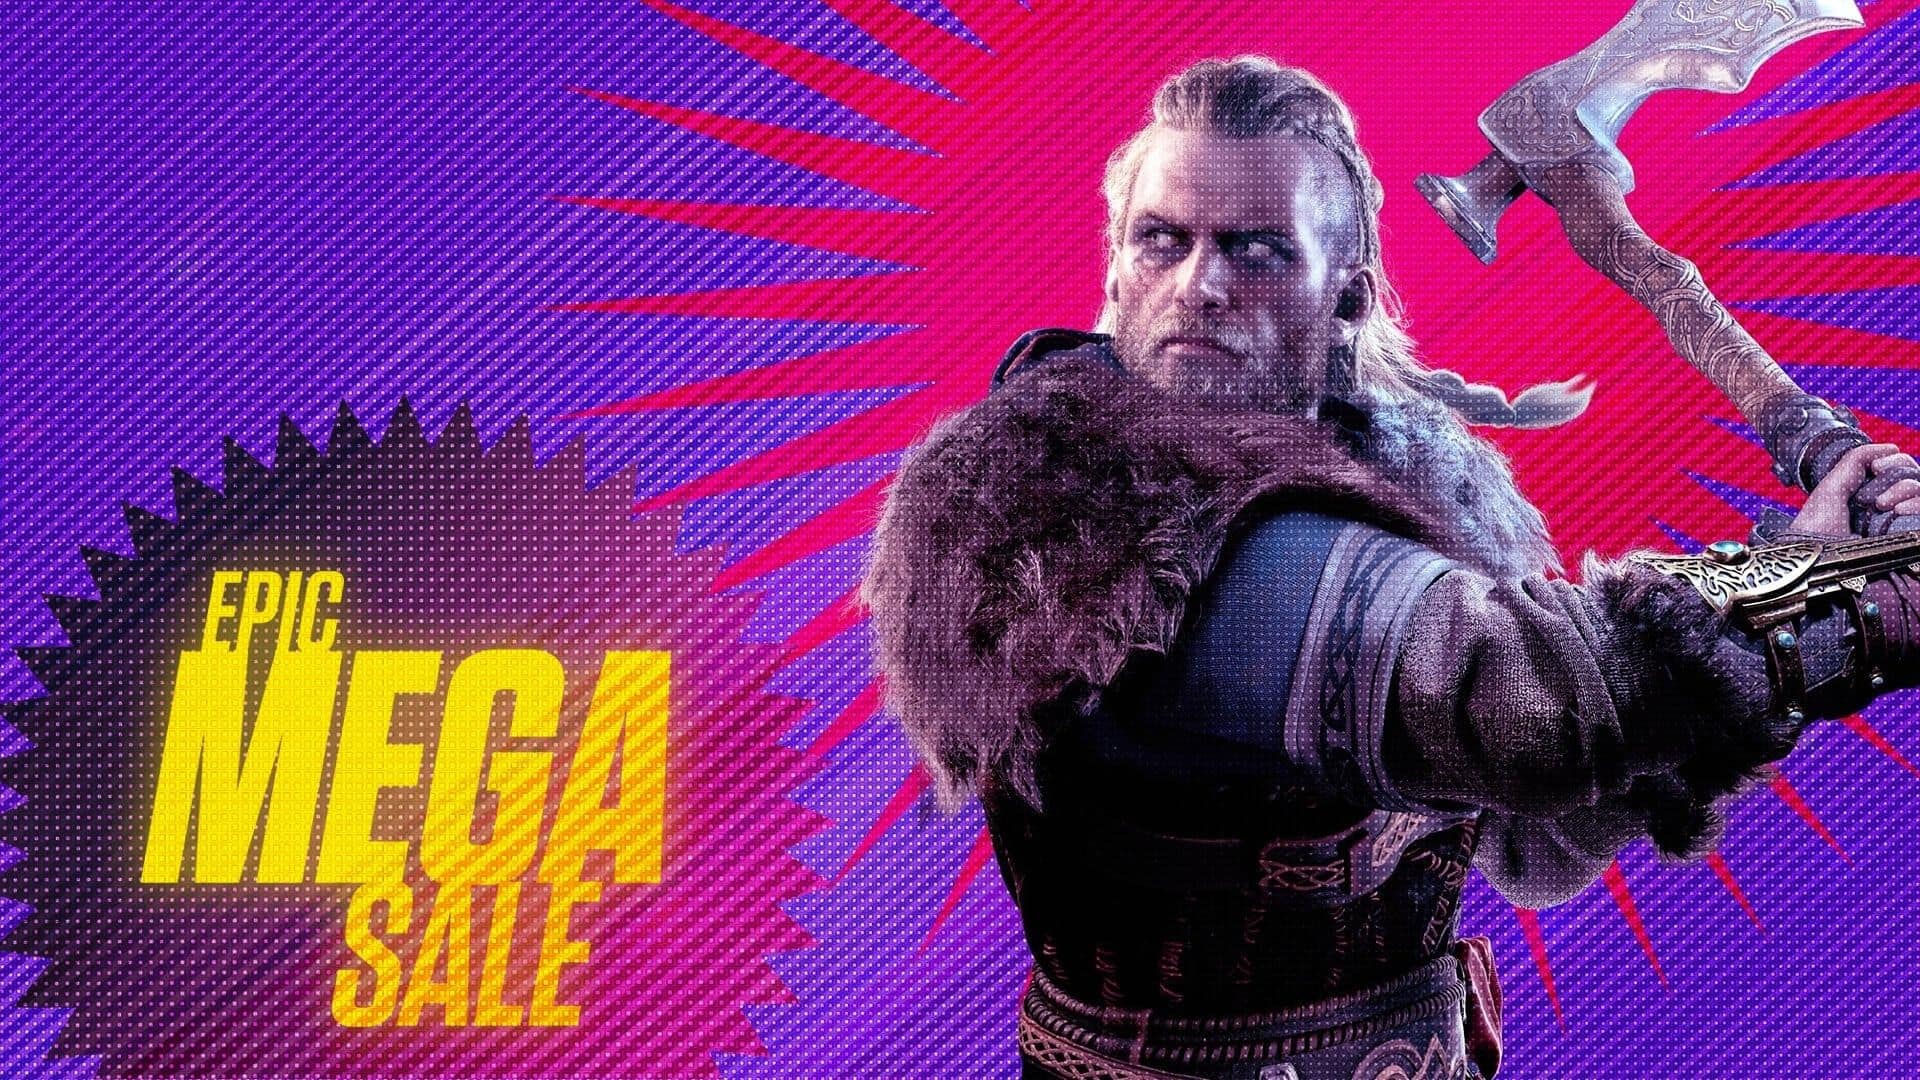 The Epic Games Store Mega Sale returns with free games and discounts